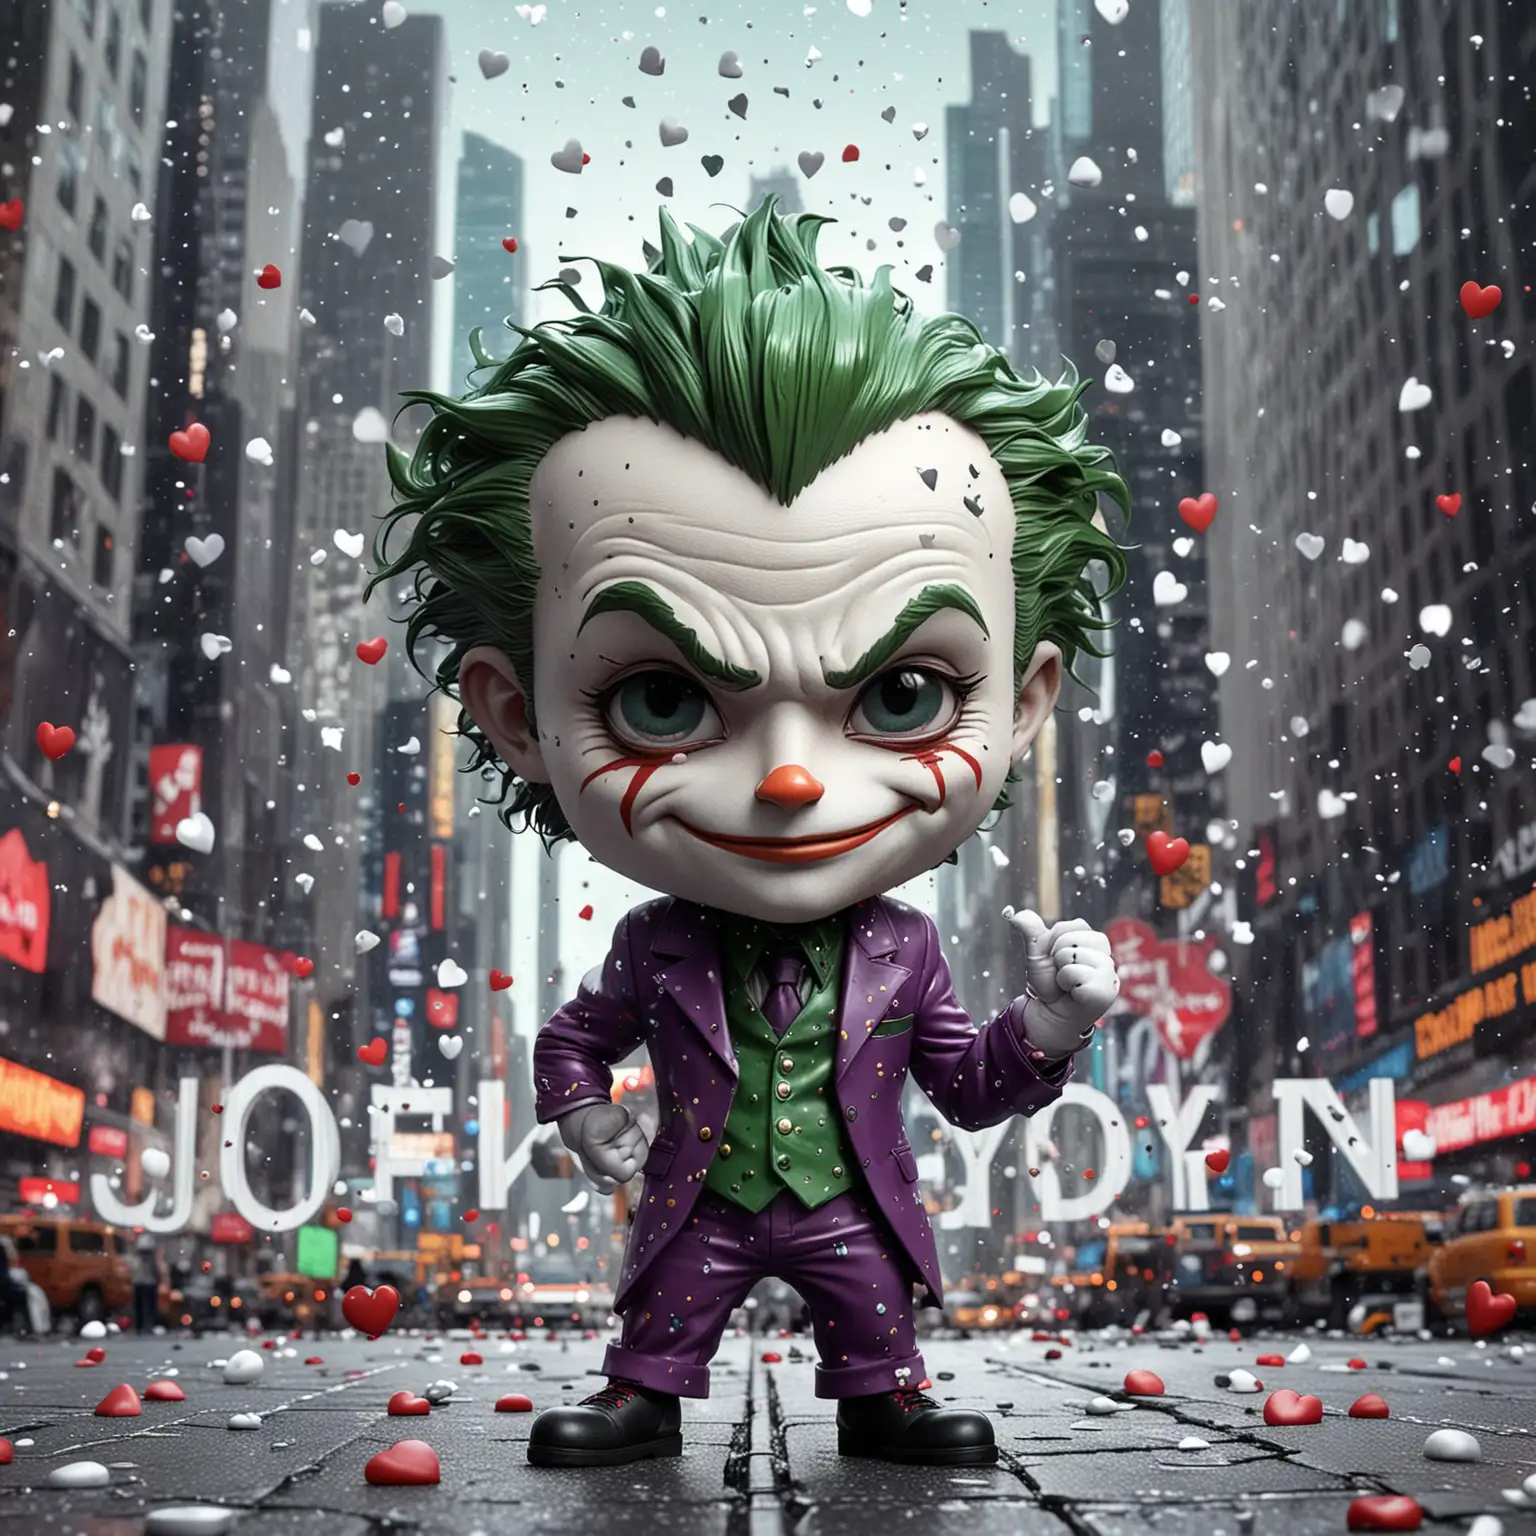 A charming and playful 3D rendering of the joker as a chibi character. He is dressed in his signature style.written in comical, metallic white text, surrounded by stars and hearts. The background is a times square New York. The overall feeling of the image is lively, fun, and full of energy., typography, poster, cinematic, fashion, anime